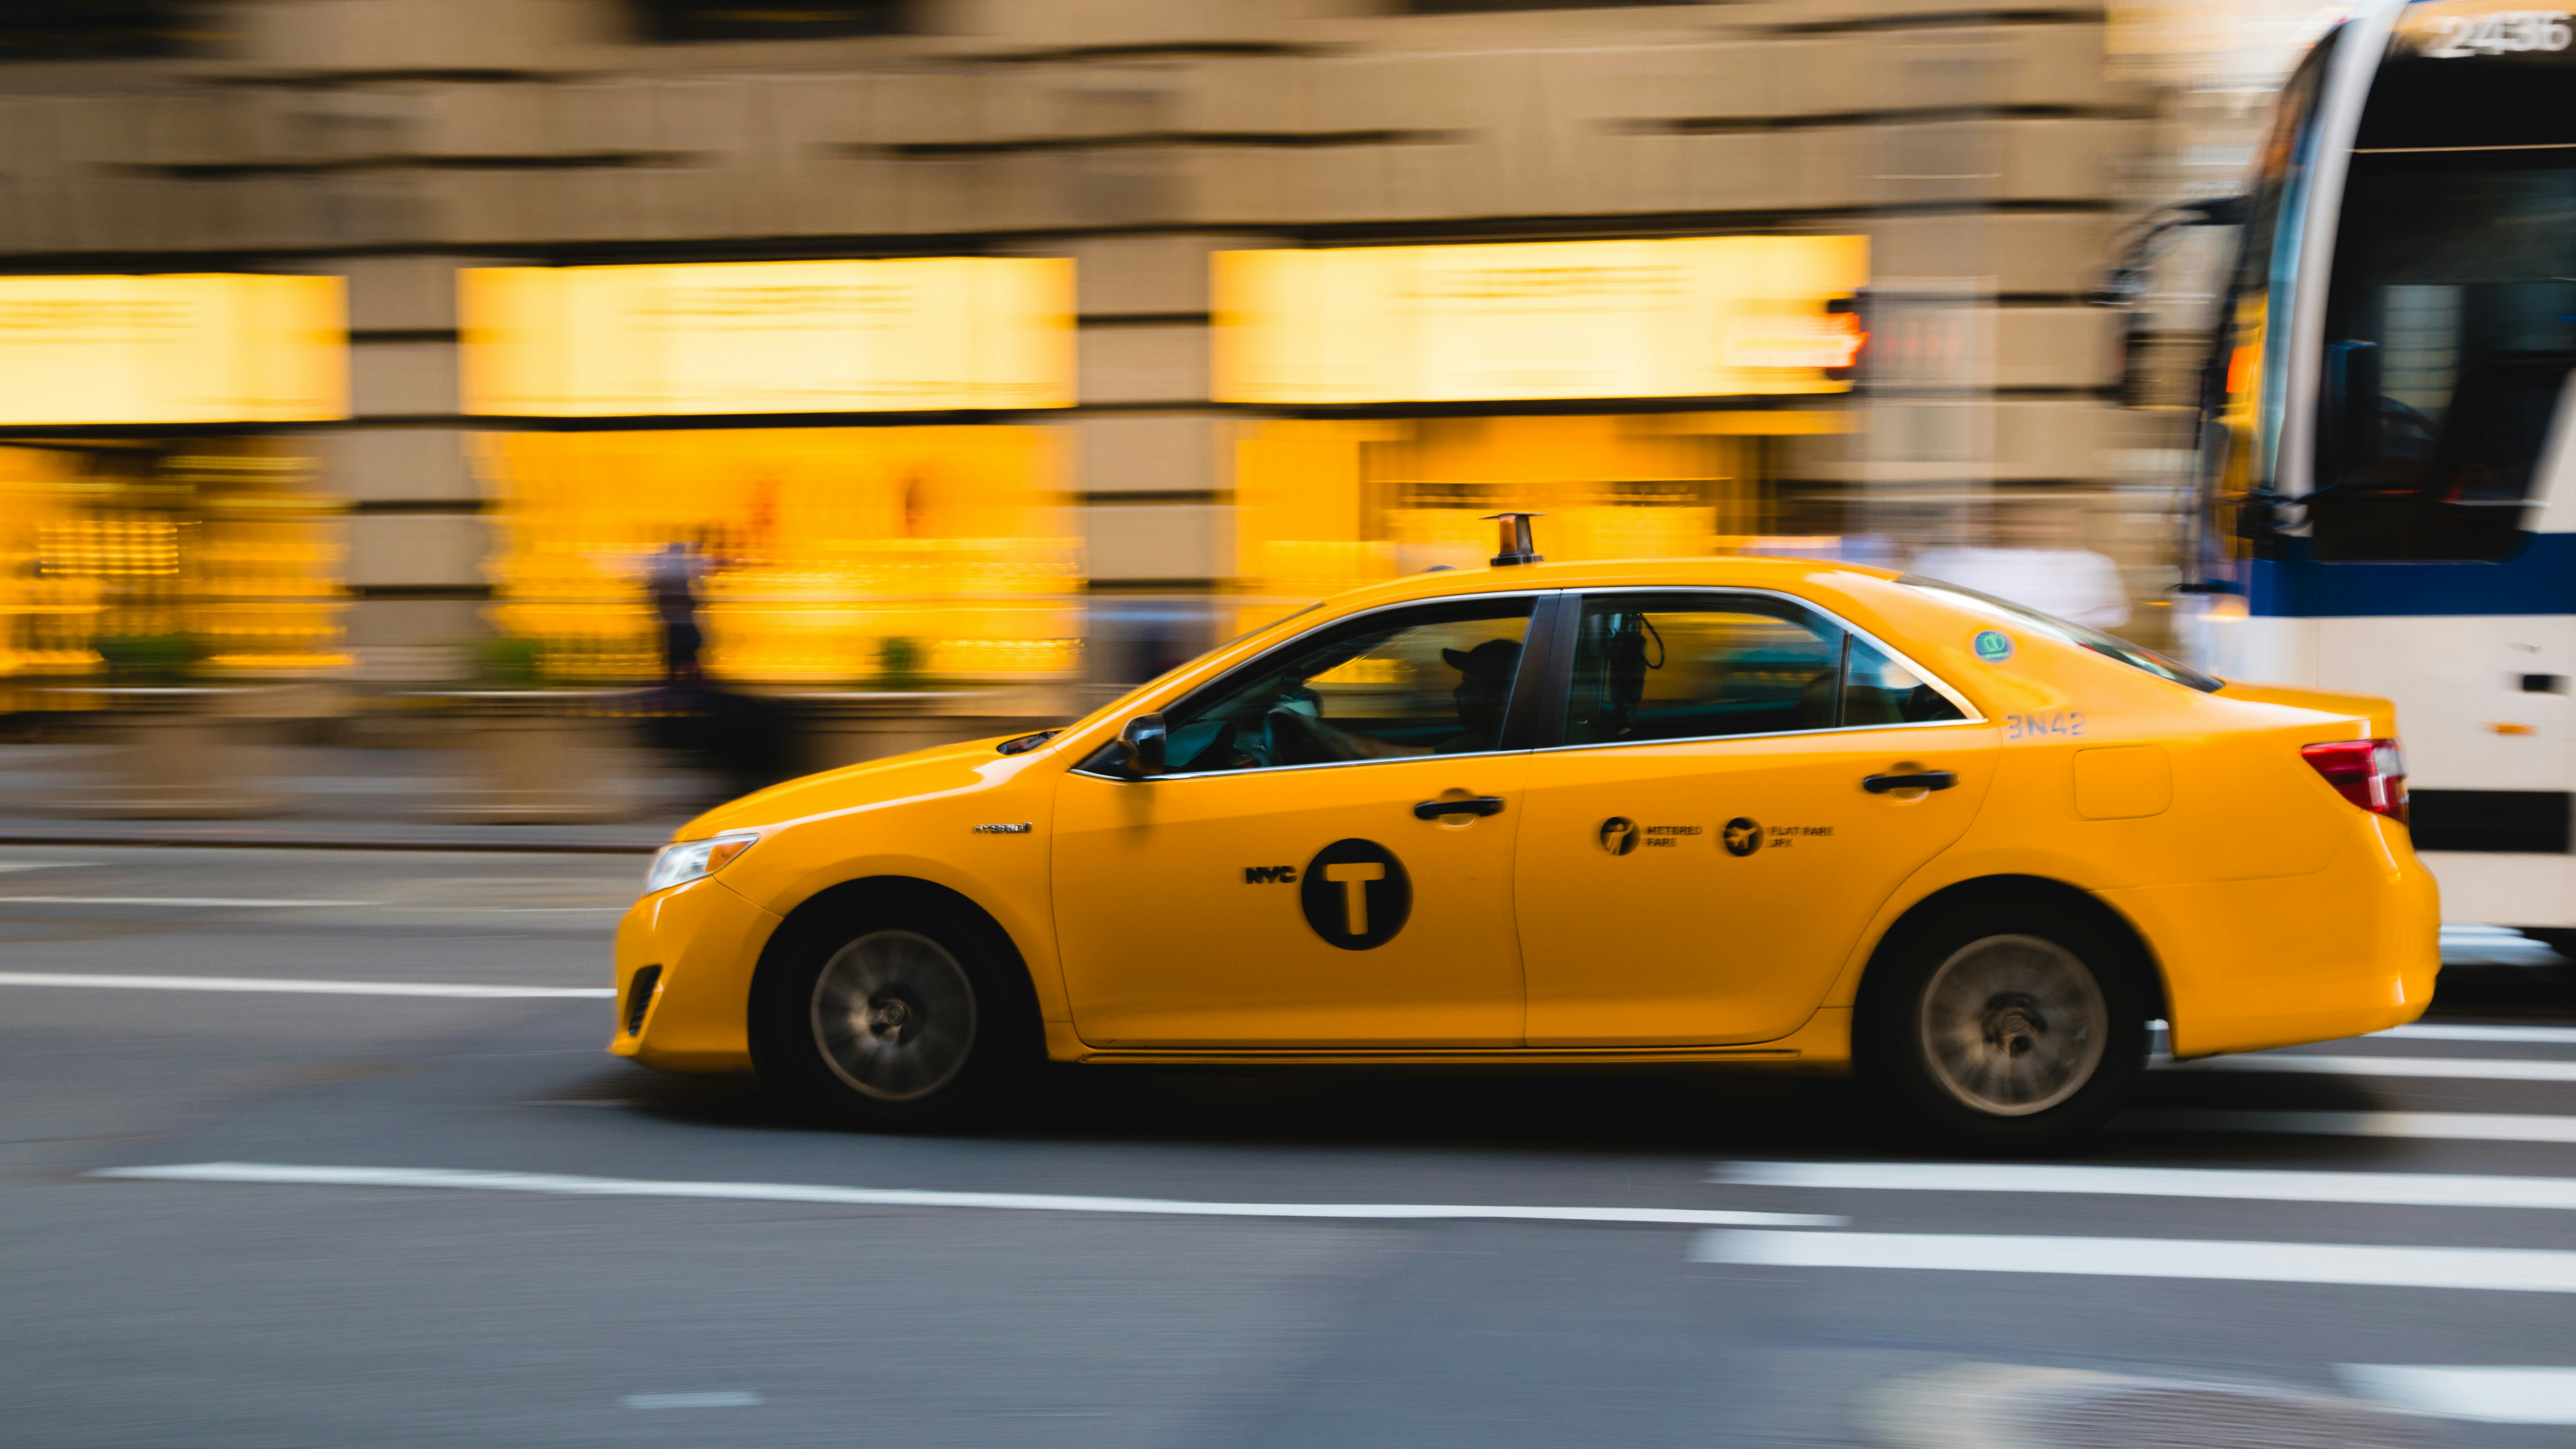 Taxis are Returning to Combat Ridesharing Price Hikes